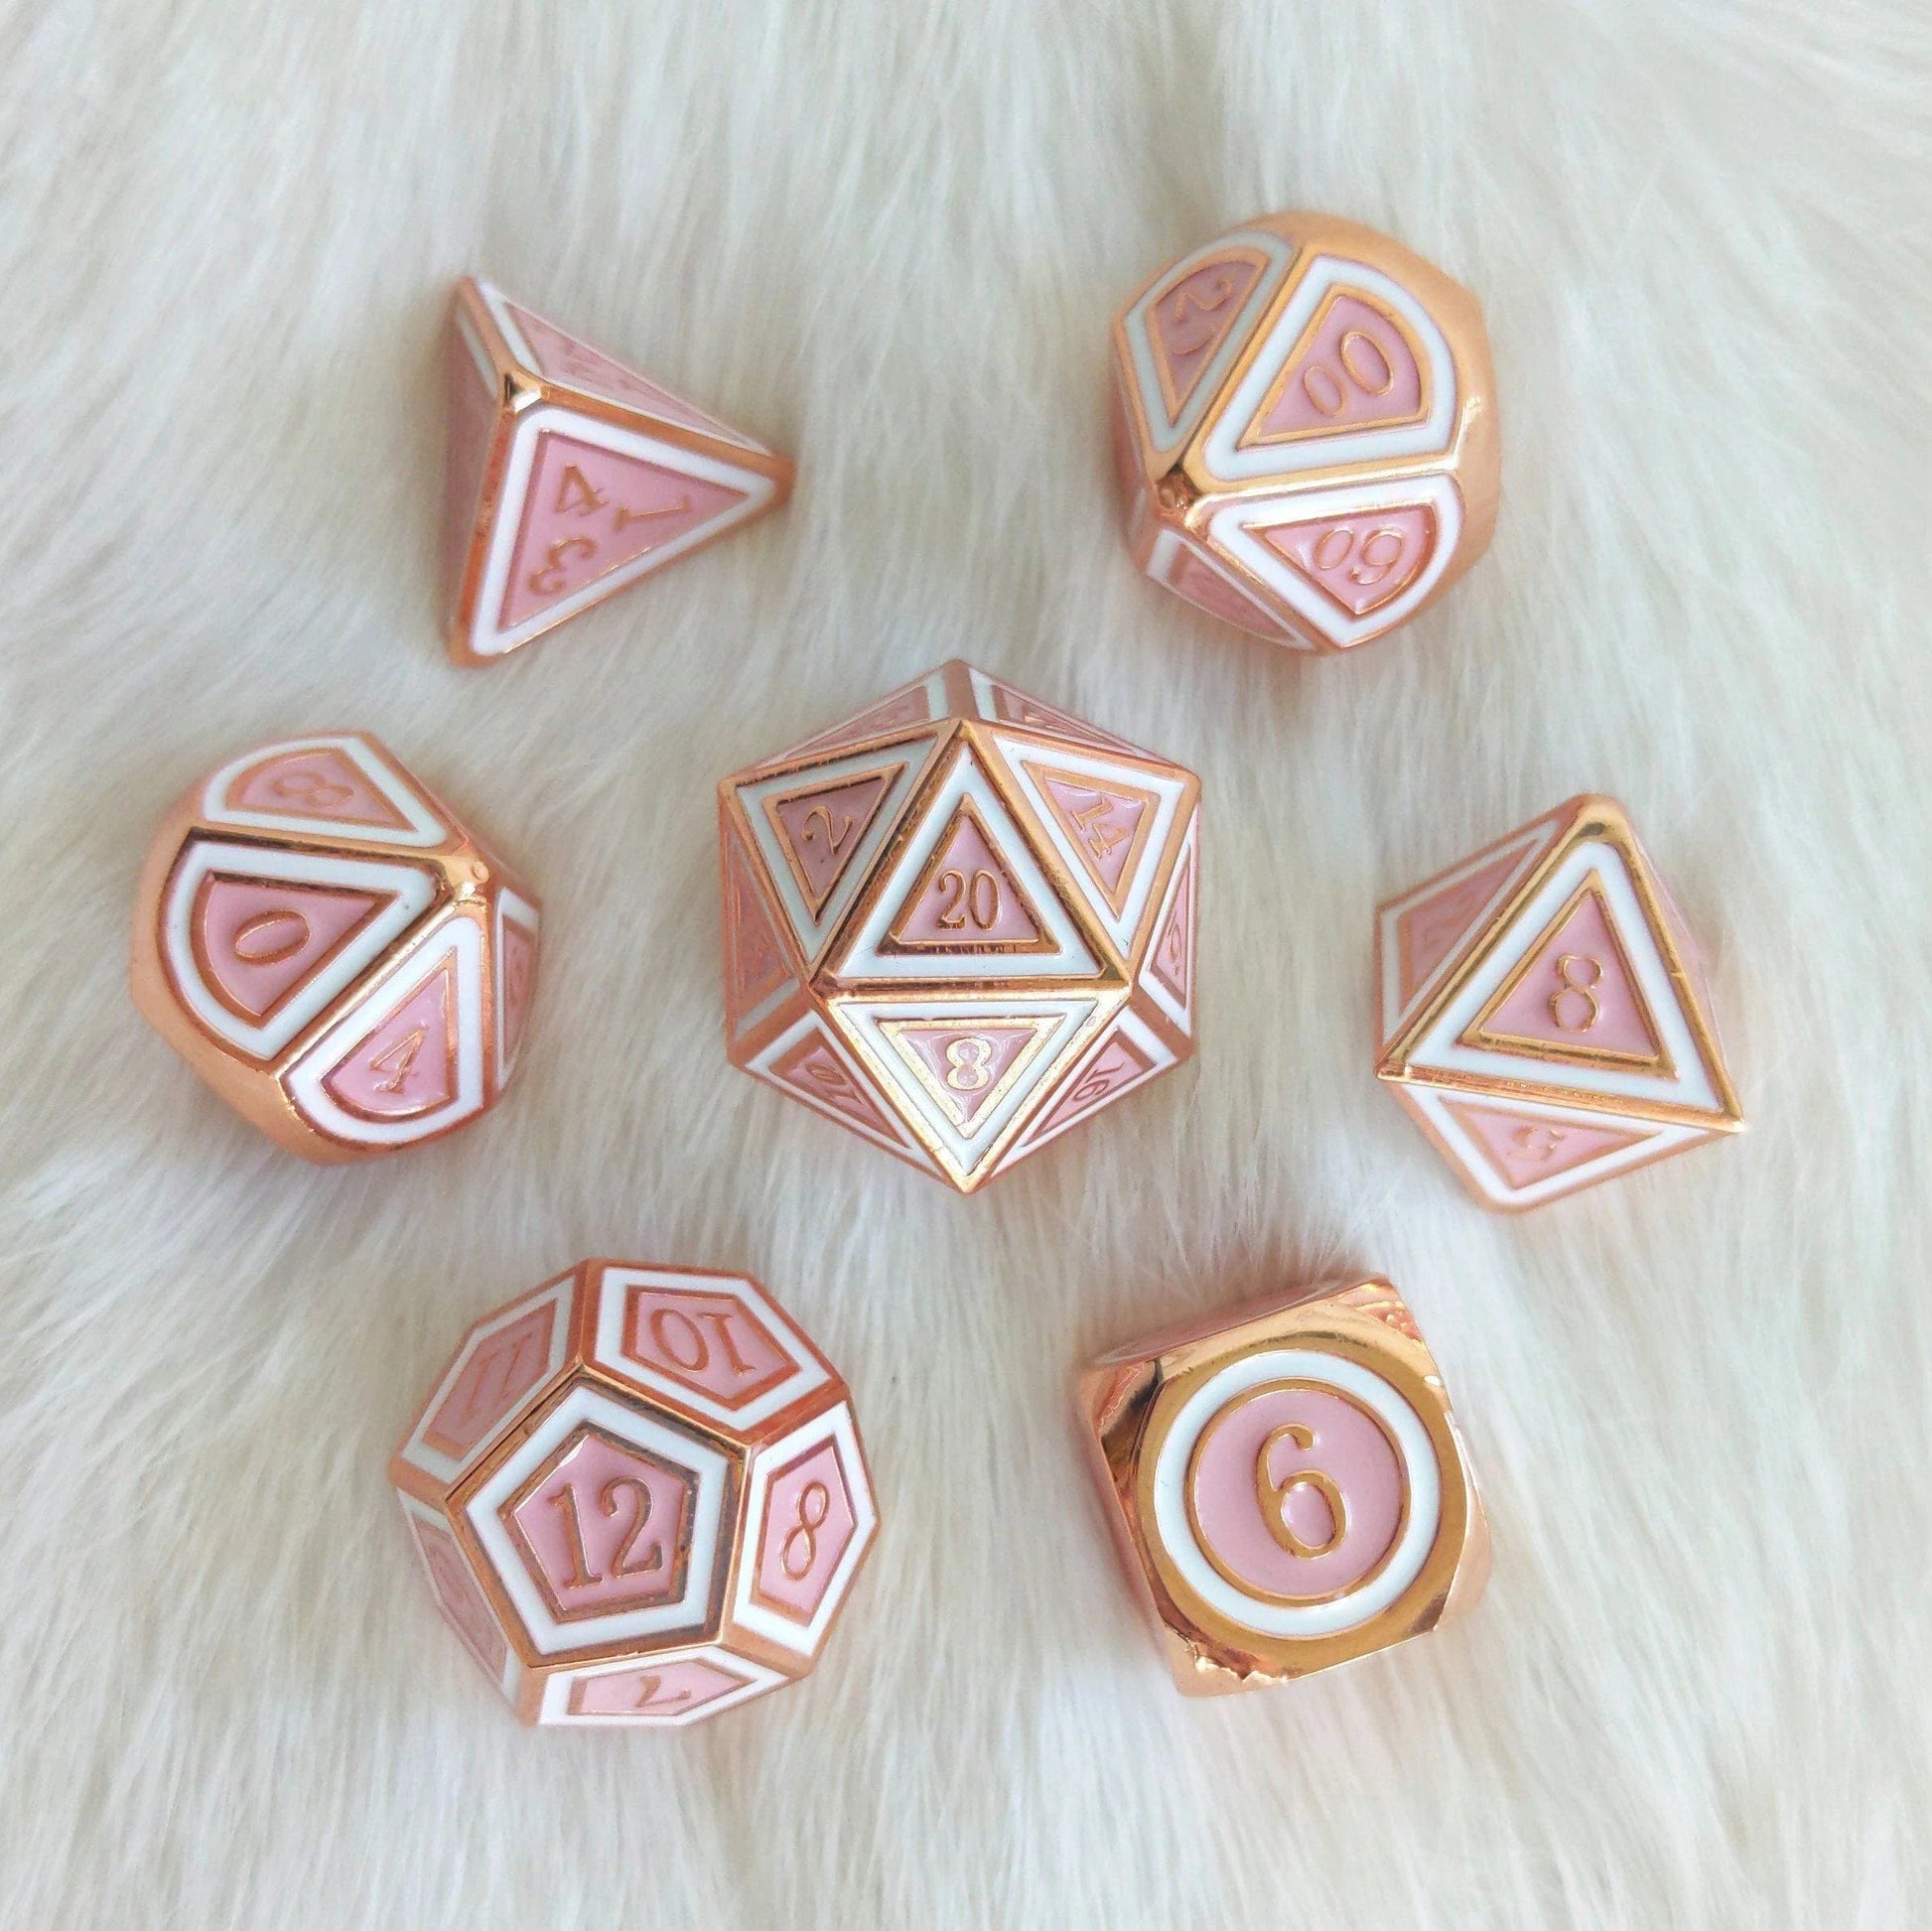 Ostara Metal Dice (Copper Plated Pink and White) - 7 Piece Set - The Fourth Place